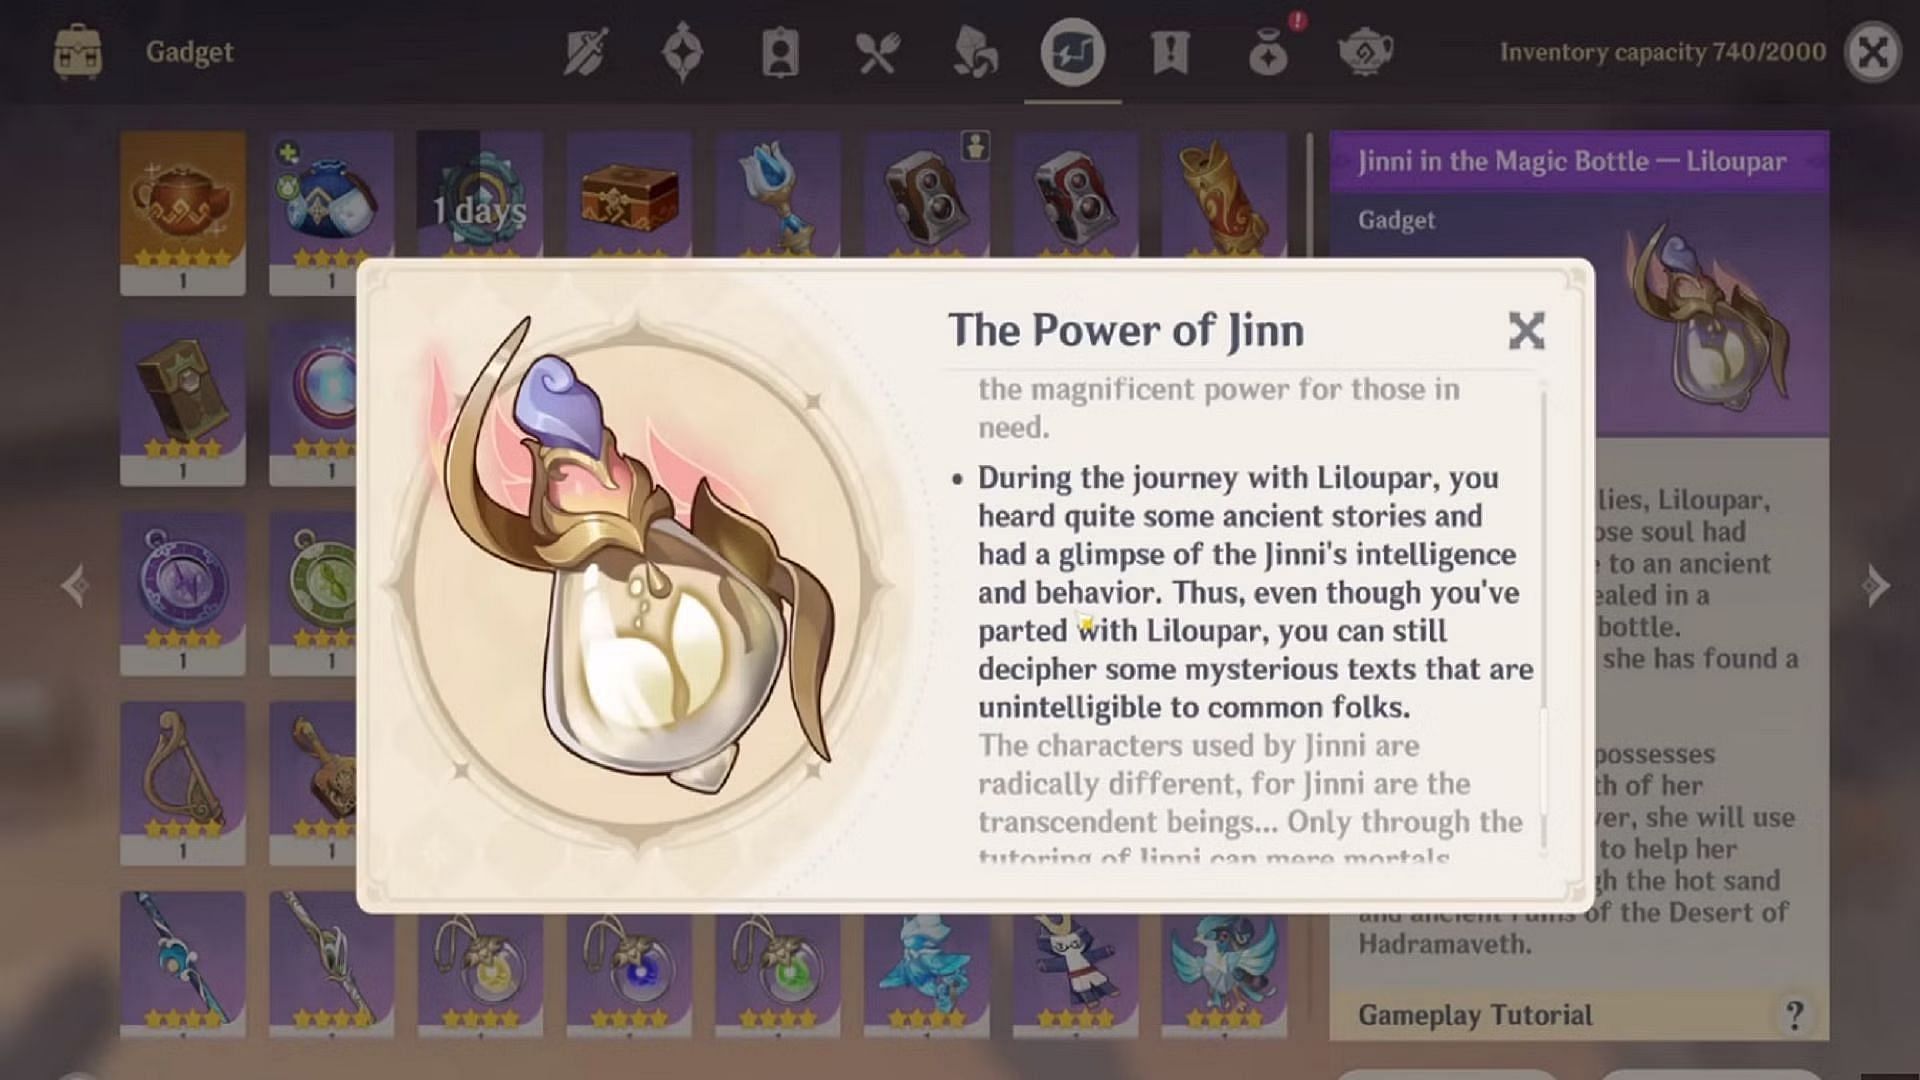 The final ability of Jinni in the Magic Bottle (Image via HoYoverse)